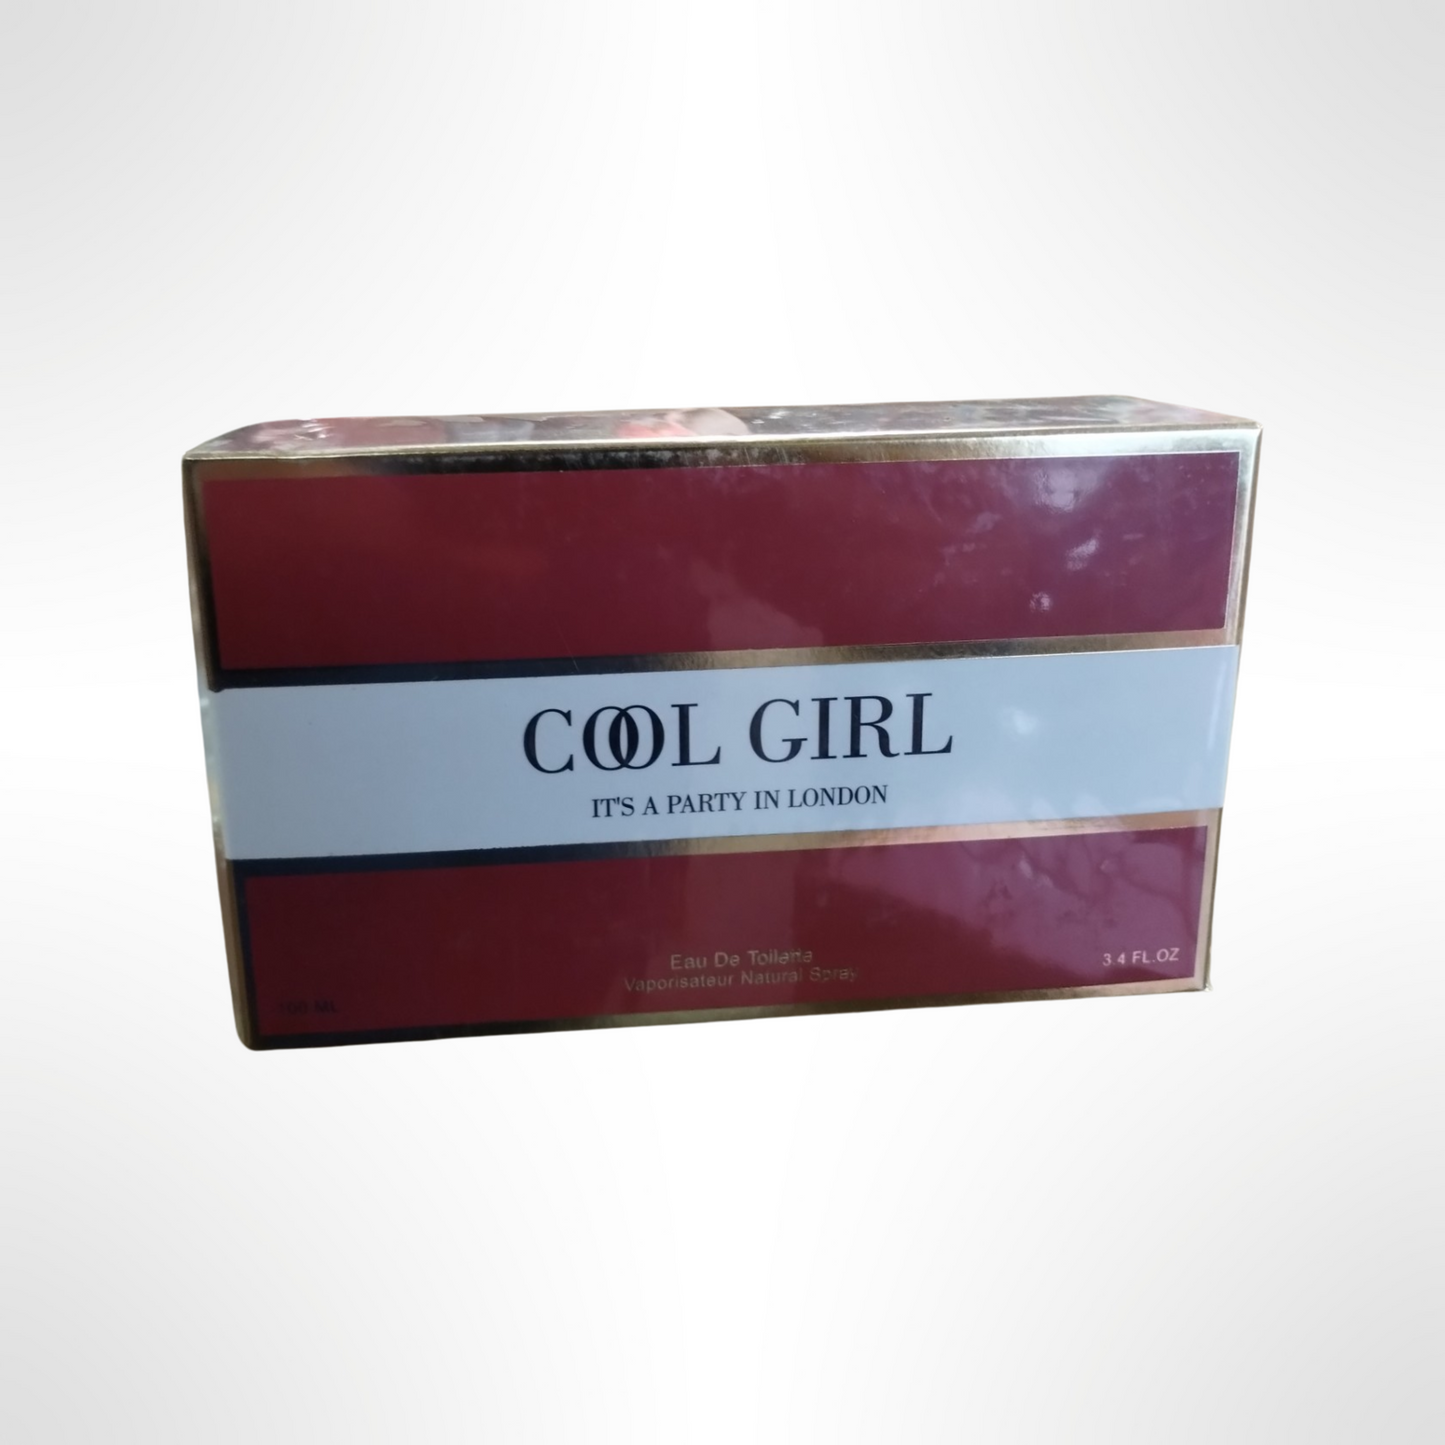 SP - Cool Girl "Its A Party In London" - Women's Perfume